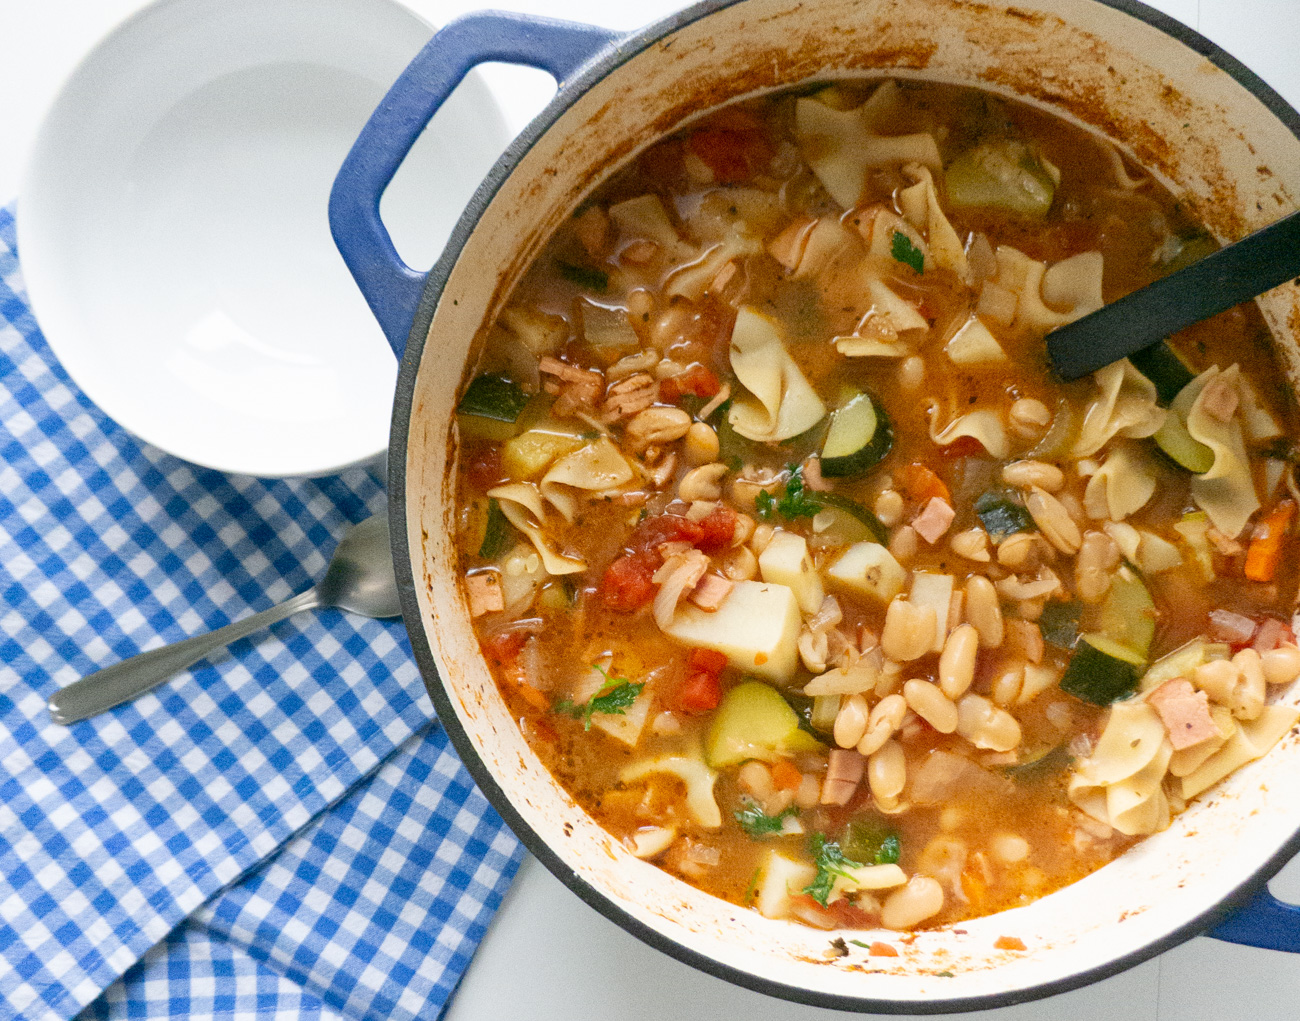 Country Vegetable Soup
